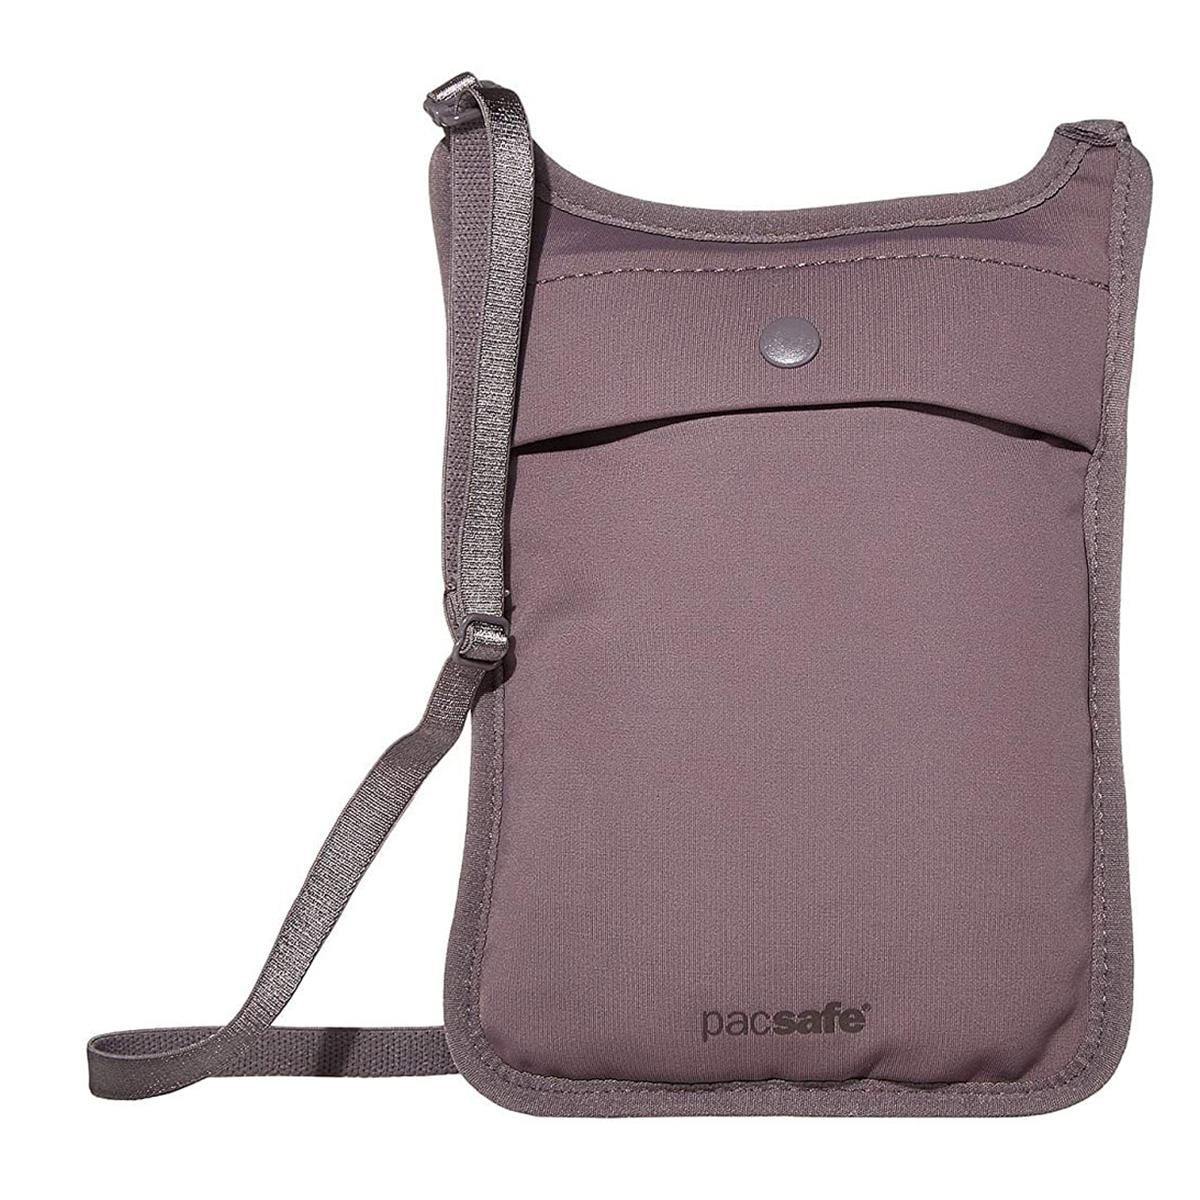 Image of Pacsafe Coversafe S75 neck pouch - MAUVE SHADOW